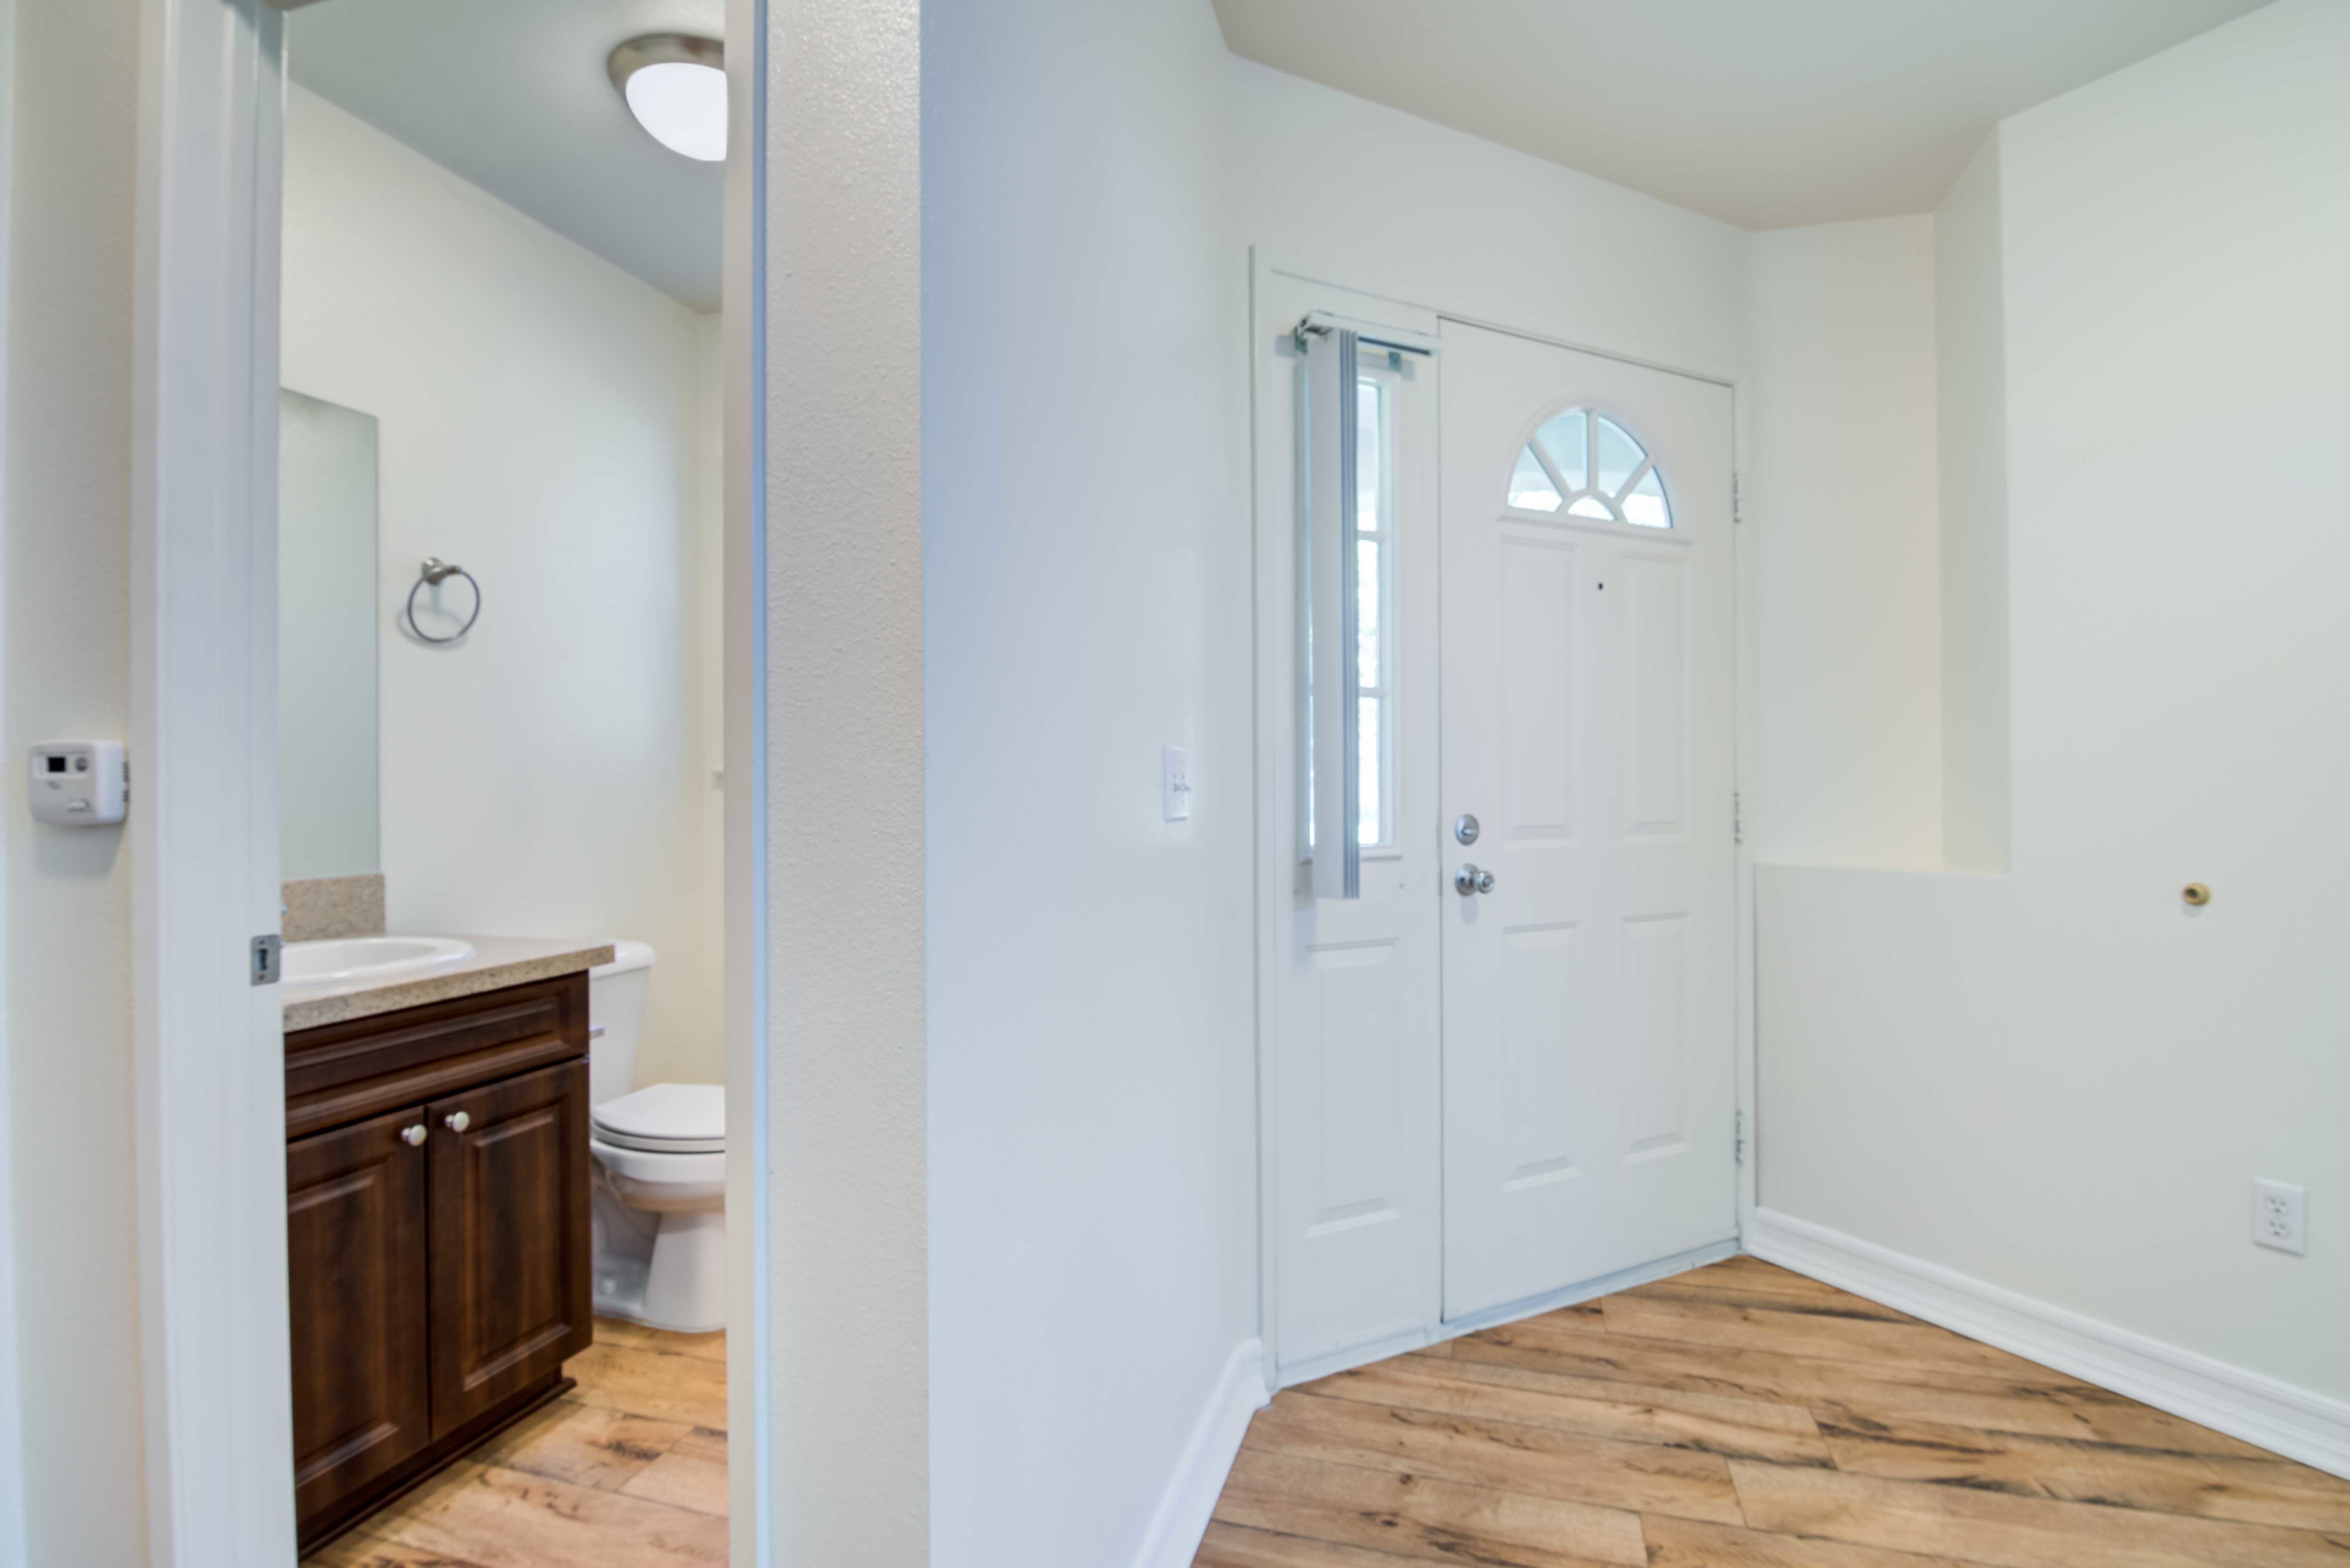 A bathroom next to the front door in a home at San Mateo Point in San Clemente, California